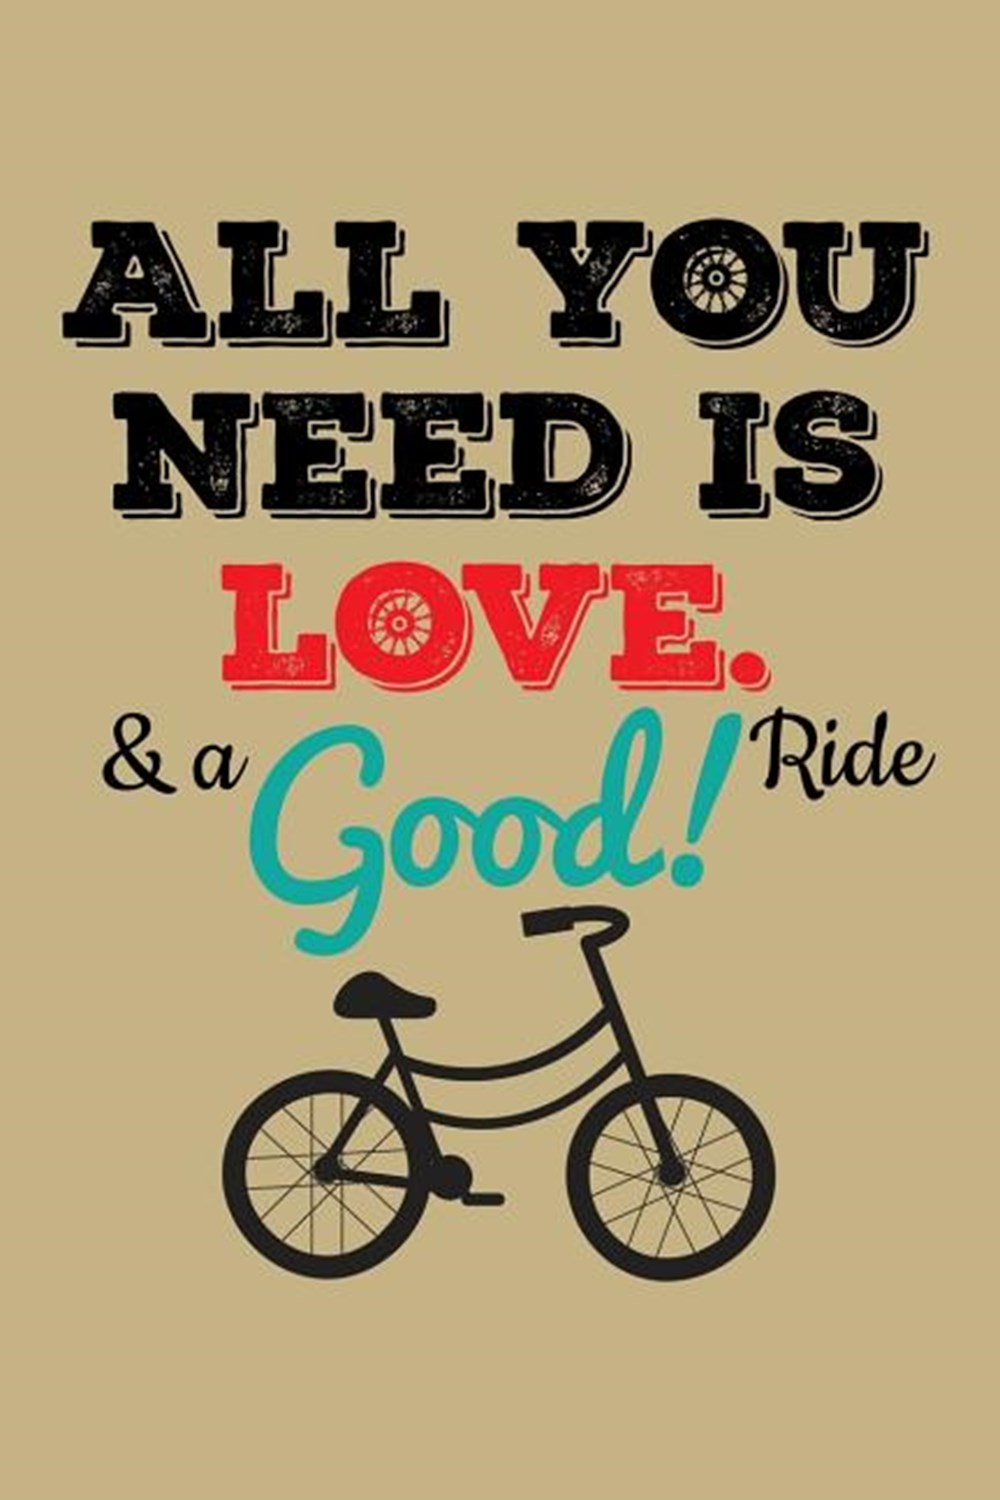 All You Need Is Love. & A Good! Ride Blank Paper Sketch Book - Artist Sketch Pad Journal for Sketchi